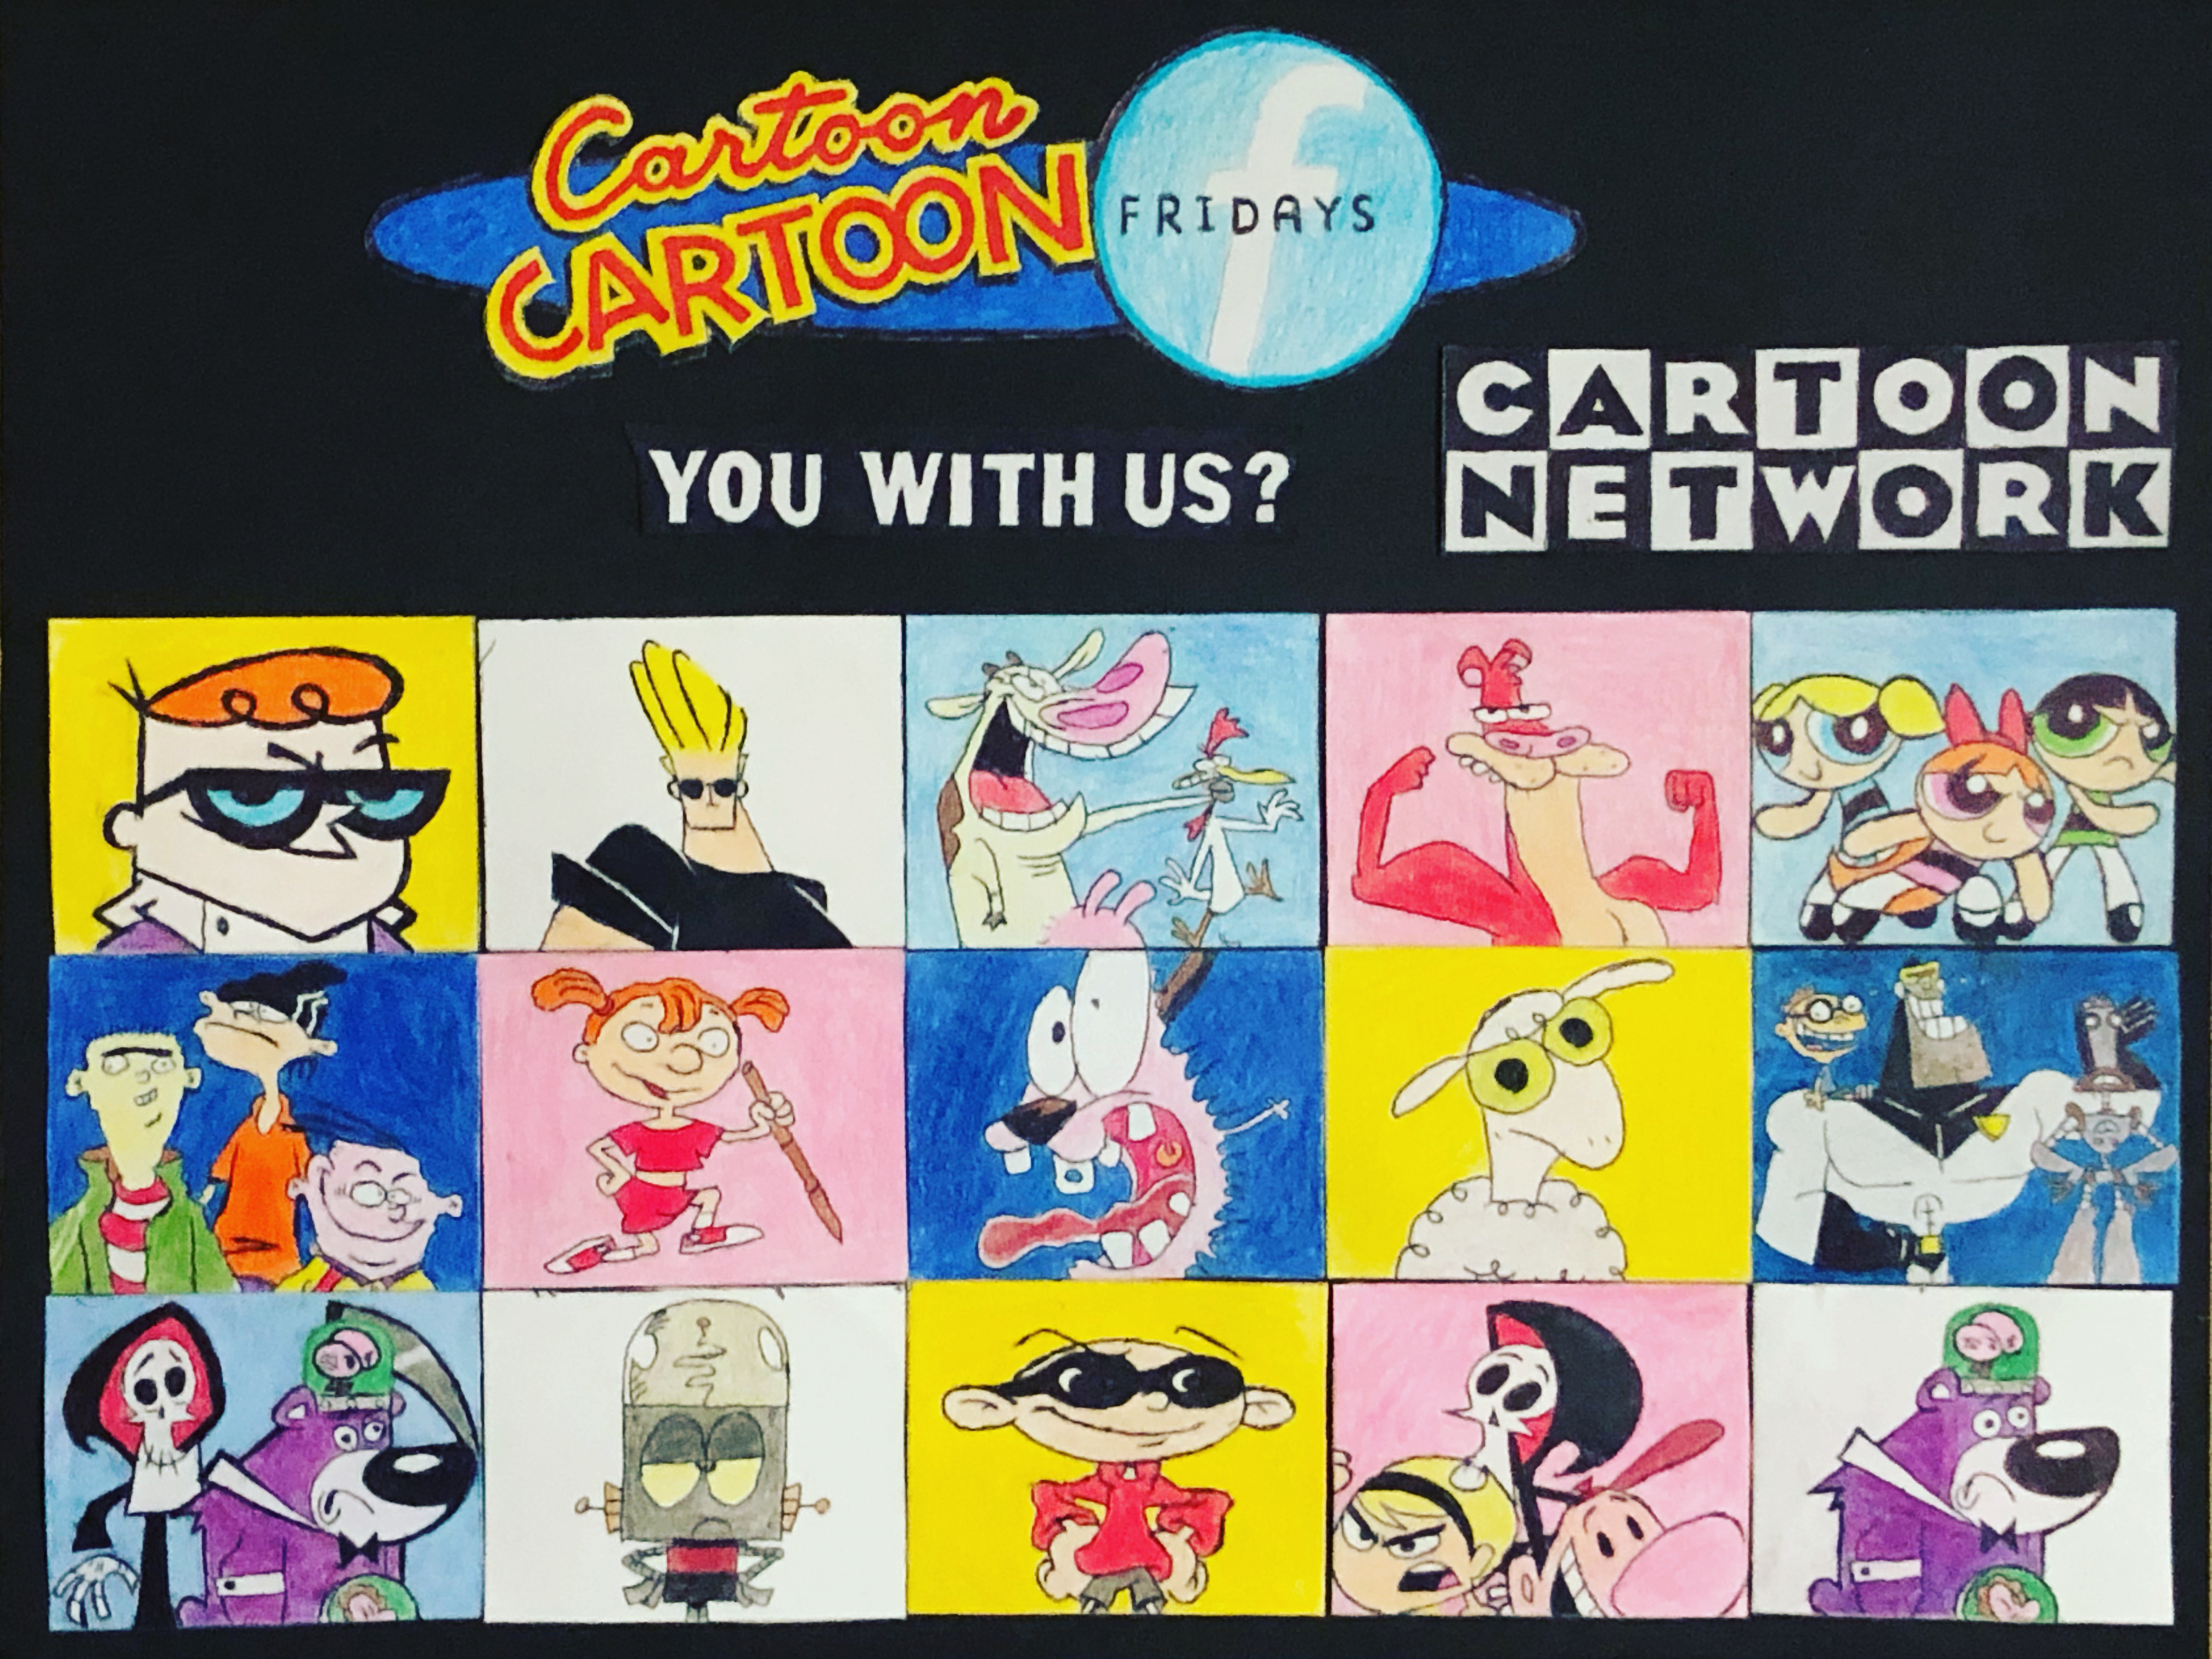 Cartoon Network - Home of the Top ANIME Stars! by Namco